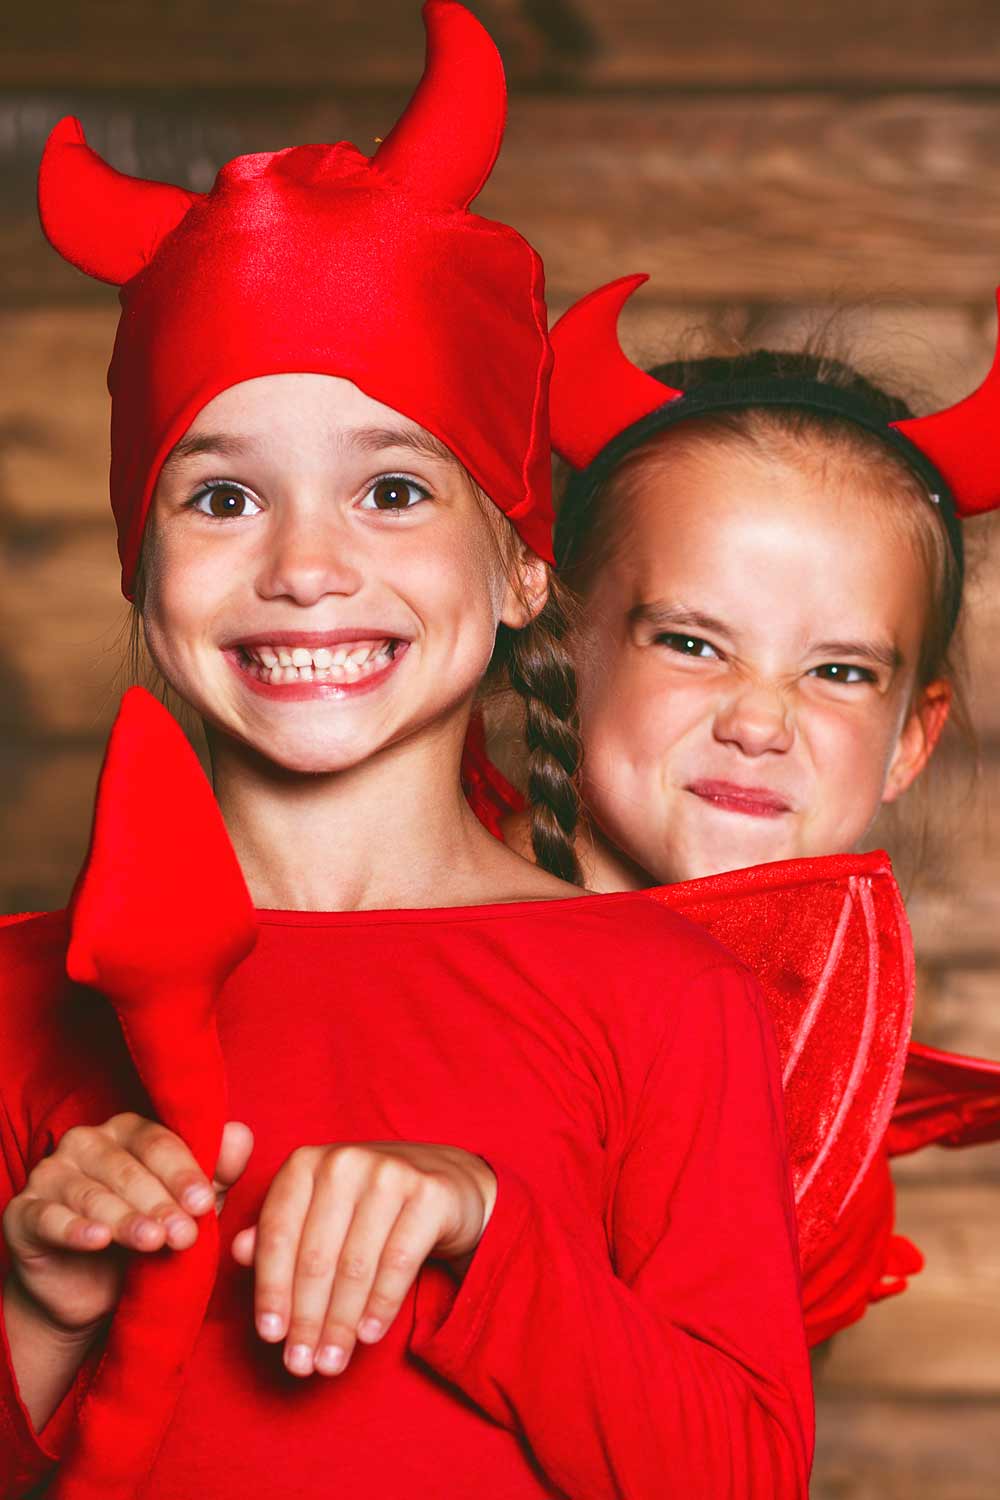 Devils Halloween Costumes for Friends